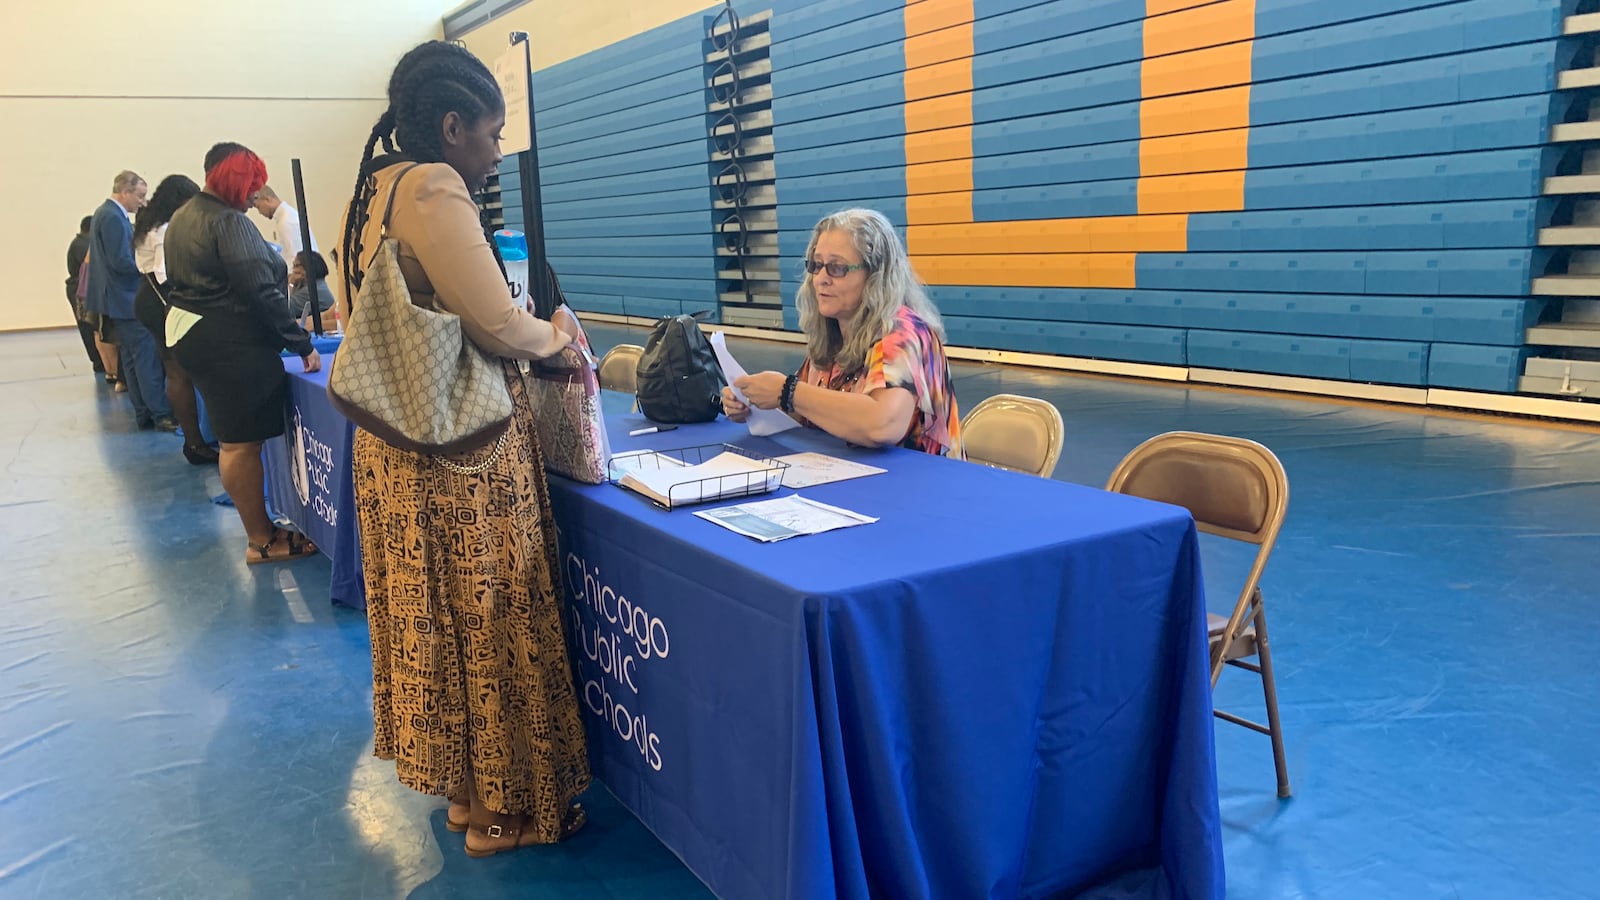 A district representative speaks to a candidate at the Chicago Public Schools job fair in the gymnasium of Richard J Daley College.